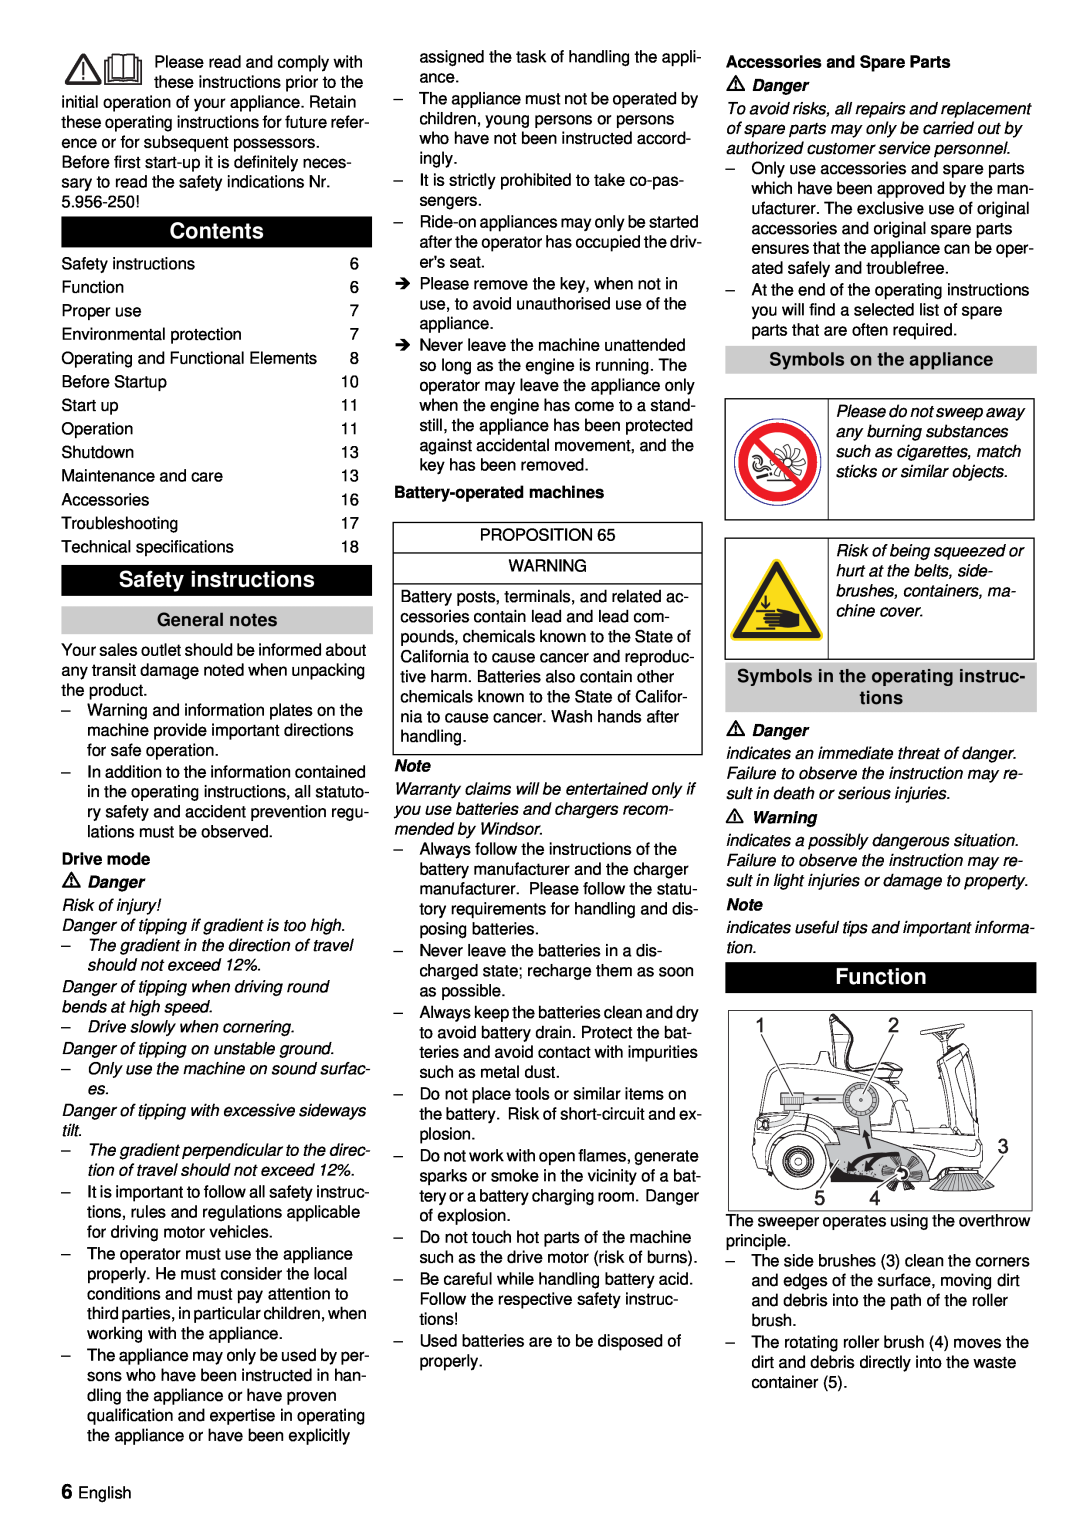 Windsor RRB 360 Safety instructions, Function, Contents, General notes, Symbols on the appliance, Battery-operatedmachines 